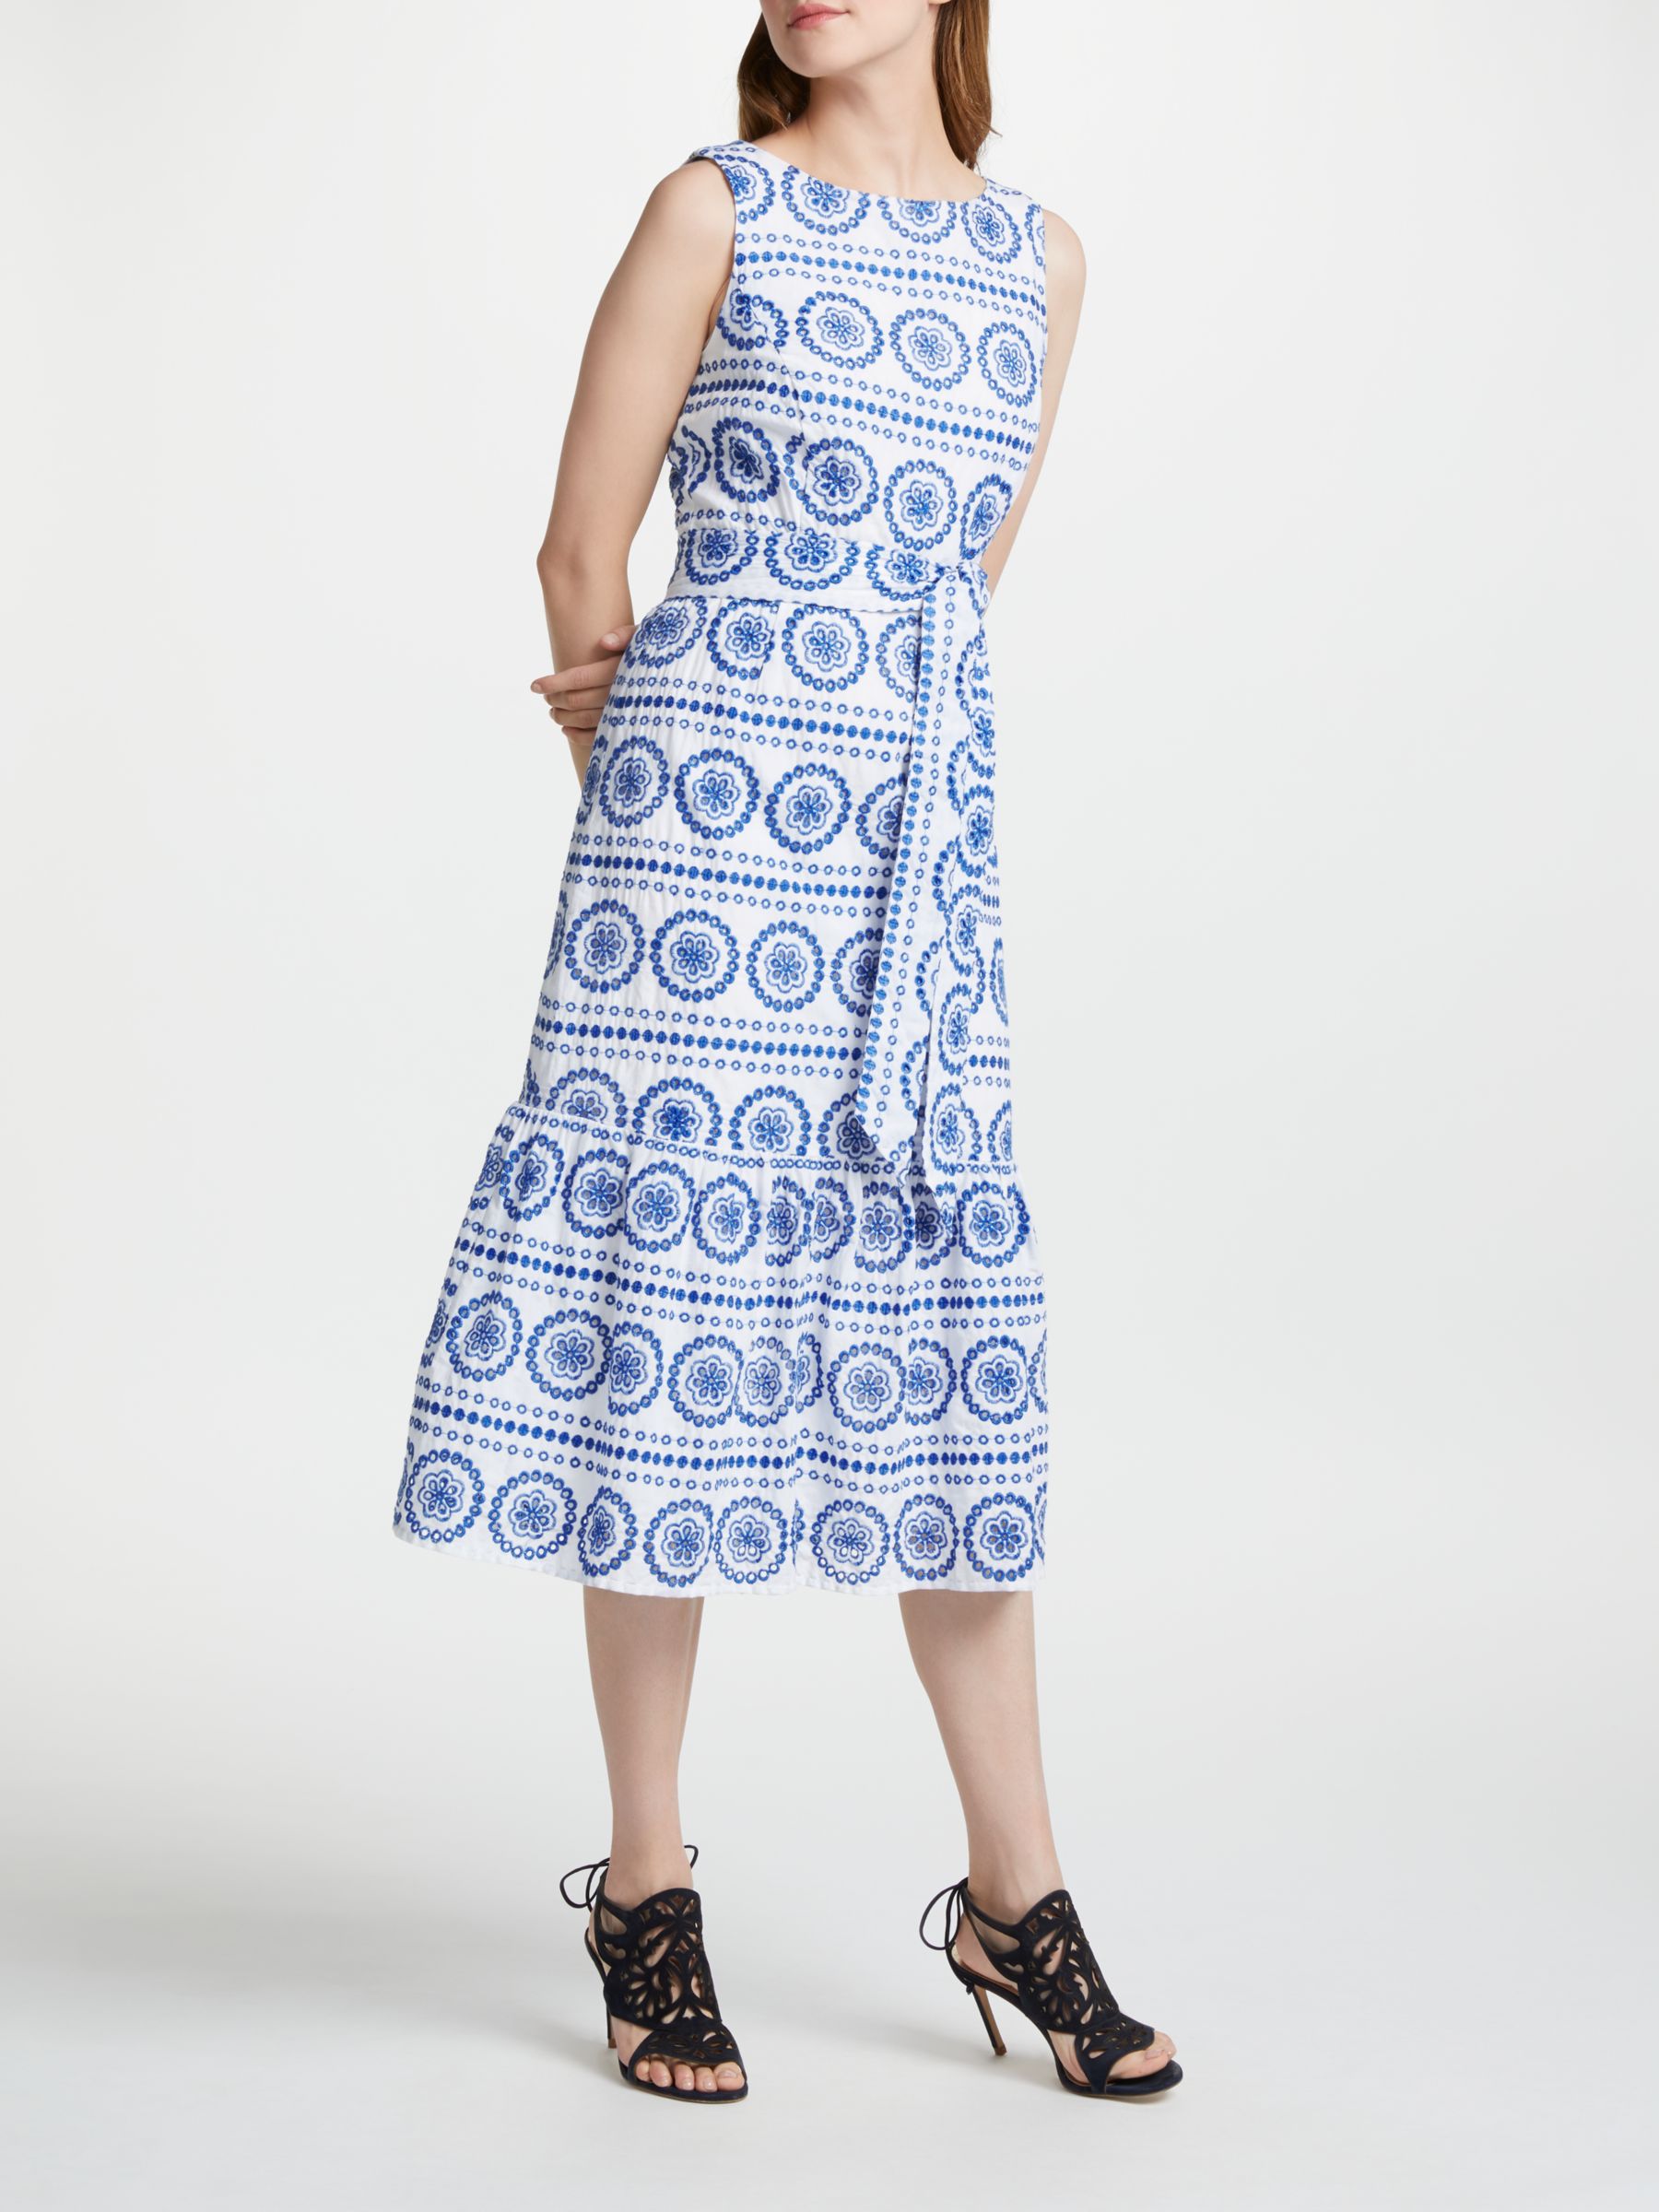 boden blue and white dress